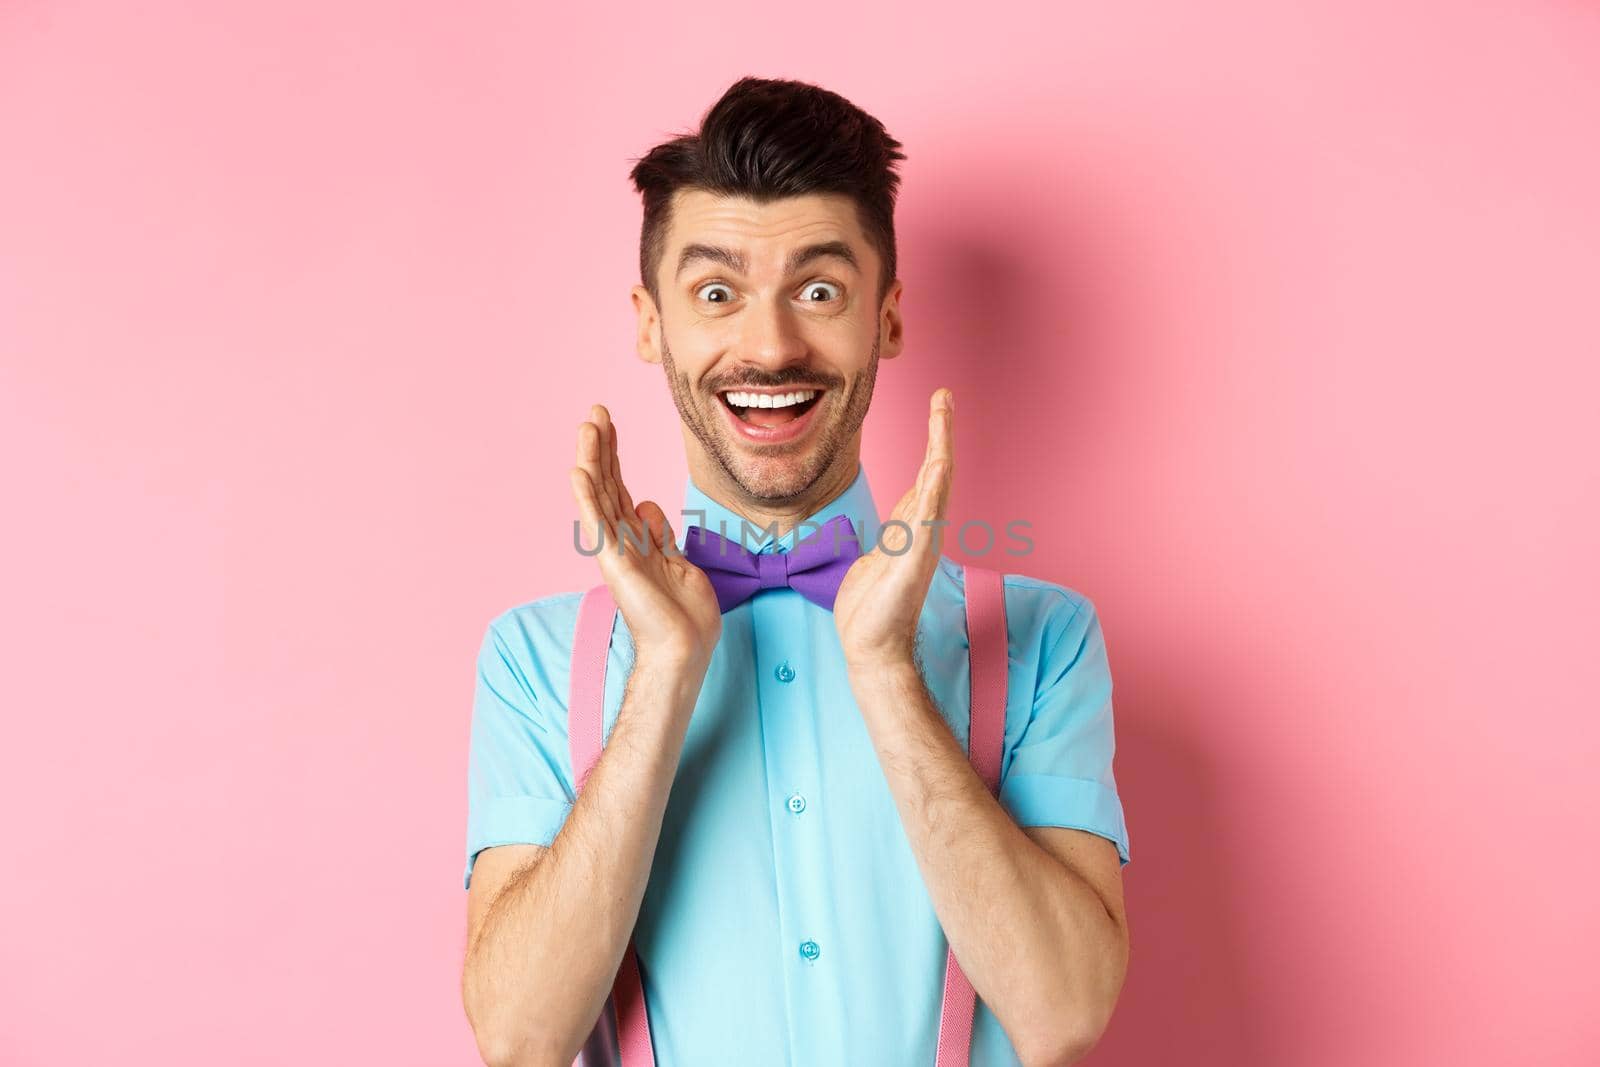 Happy young man looking with amazement and disbelief, smiling at camera, holding hands near face, standing in bow-tie and shirt on pink background.